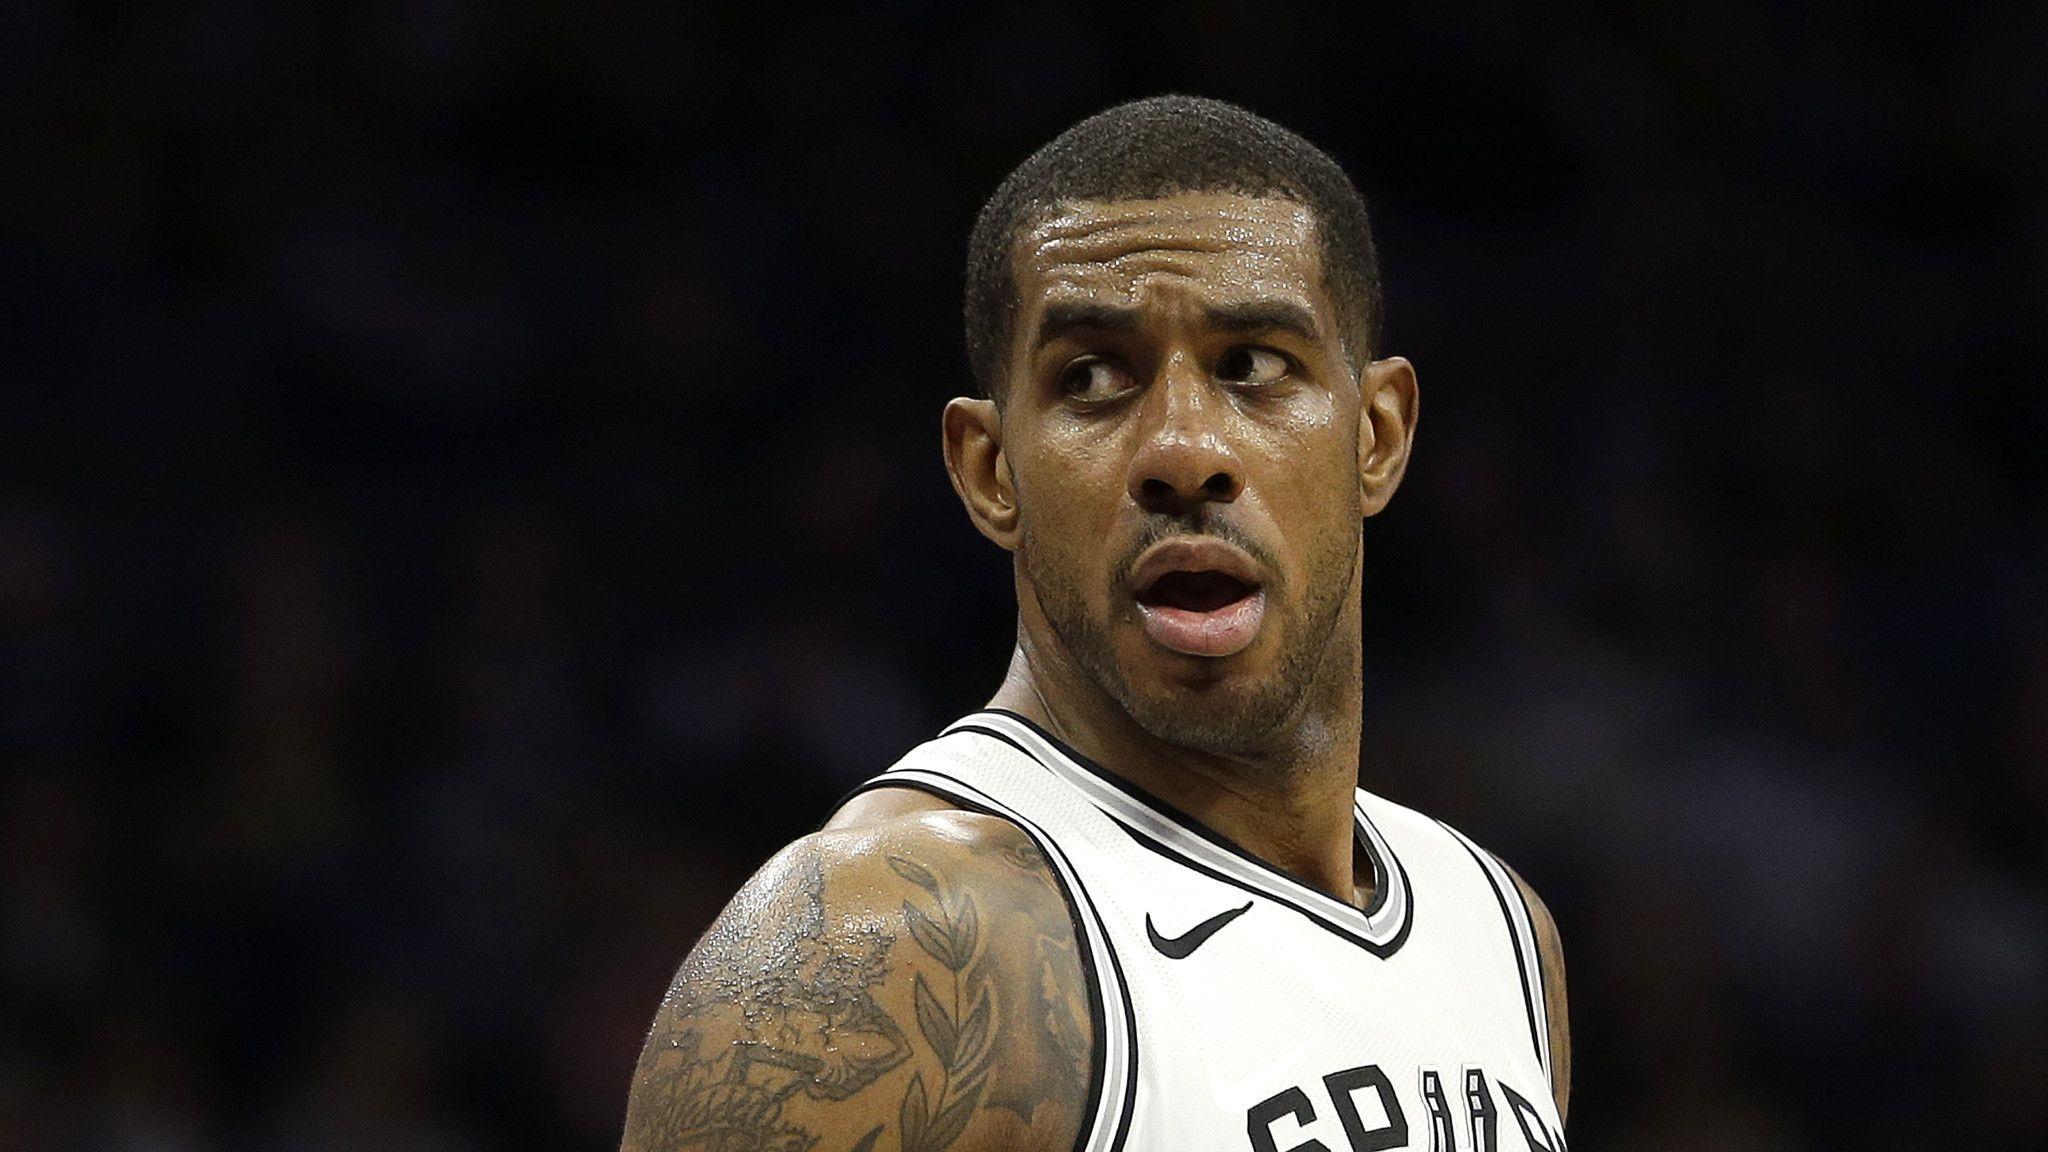 The Spurs made a big bet on LaMarcus Aldridge. He has responded